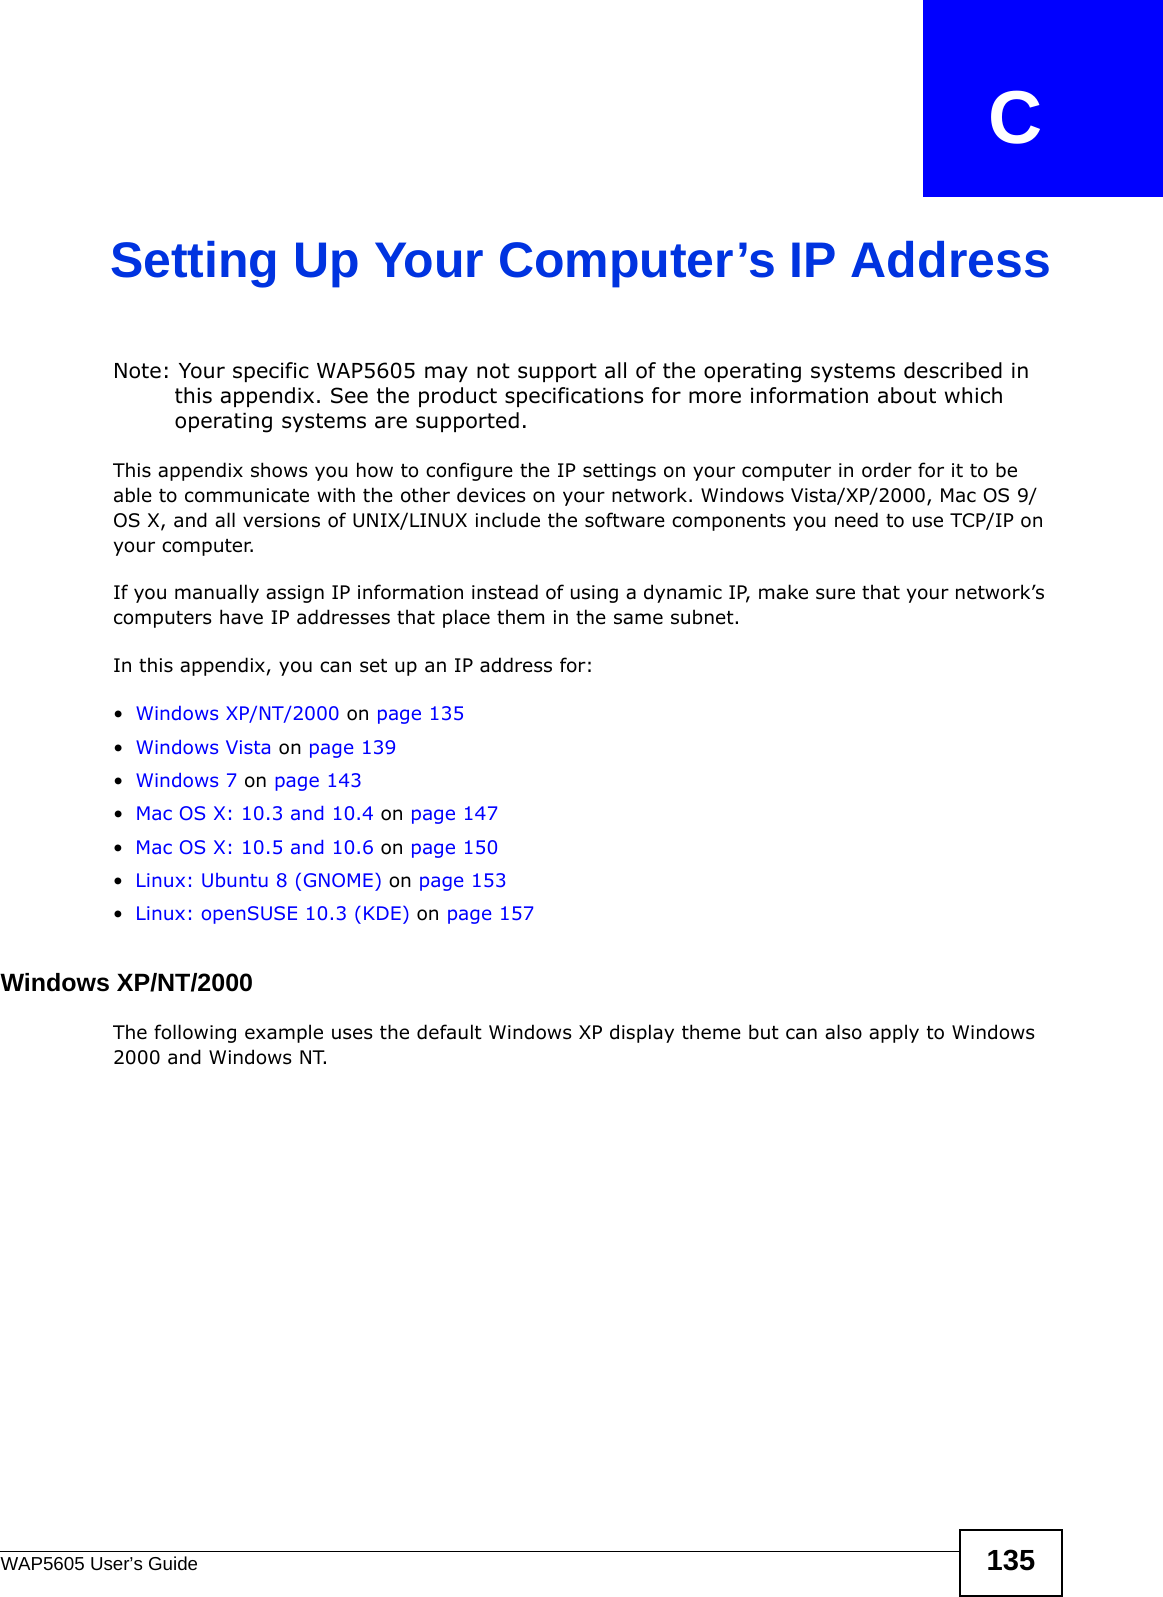 WAP5605 User’s Guide 135APPENDIX   CSetting Up Your Computer’s IP AddressNote: Your specific WAP5605 may not support all of the operating systems described in this appendix. See the product specifications for more information about which operating systems are supported.This appendix shows you how to configure the IP settings on your computer in order for it to be able to communicate with the other devices on your network. Windows Vista/XP/2000, Mac OS 9/OS X, and all versions of UNIX/LINUX include the software components you need to use TCP/IP on your computer. If you manually assign IP information instead of using a dynamic IP, make sure that your network’s computers have IP addresses that place them in the same subnet.In this appendix, you can set up an IP address for:•Windows XP/NT/2000 on page 135•Windows Vista on page 139•Windows 7 on page 143•Mac OS X: 10.3 and 10.4 on page 147•Mac OS X: 10.5 and 10.6 on page 150•Linux: Ubuntu 8 (GNOME) on page 153•Linux: openSUSE 10.3 (KDE) on page 157Windows XP/NT/2000The following example uses the default Windows XP display theme but can also apply to Windows 2000 and Windows NT.